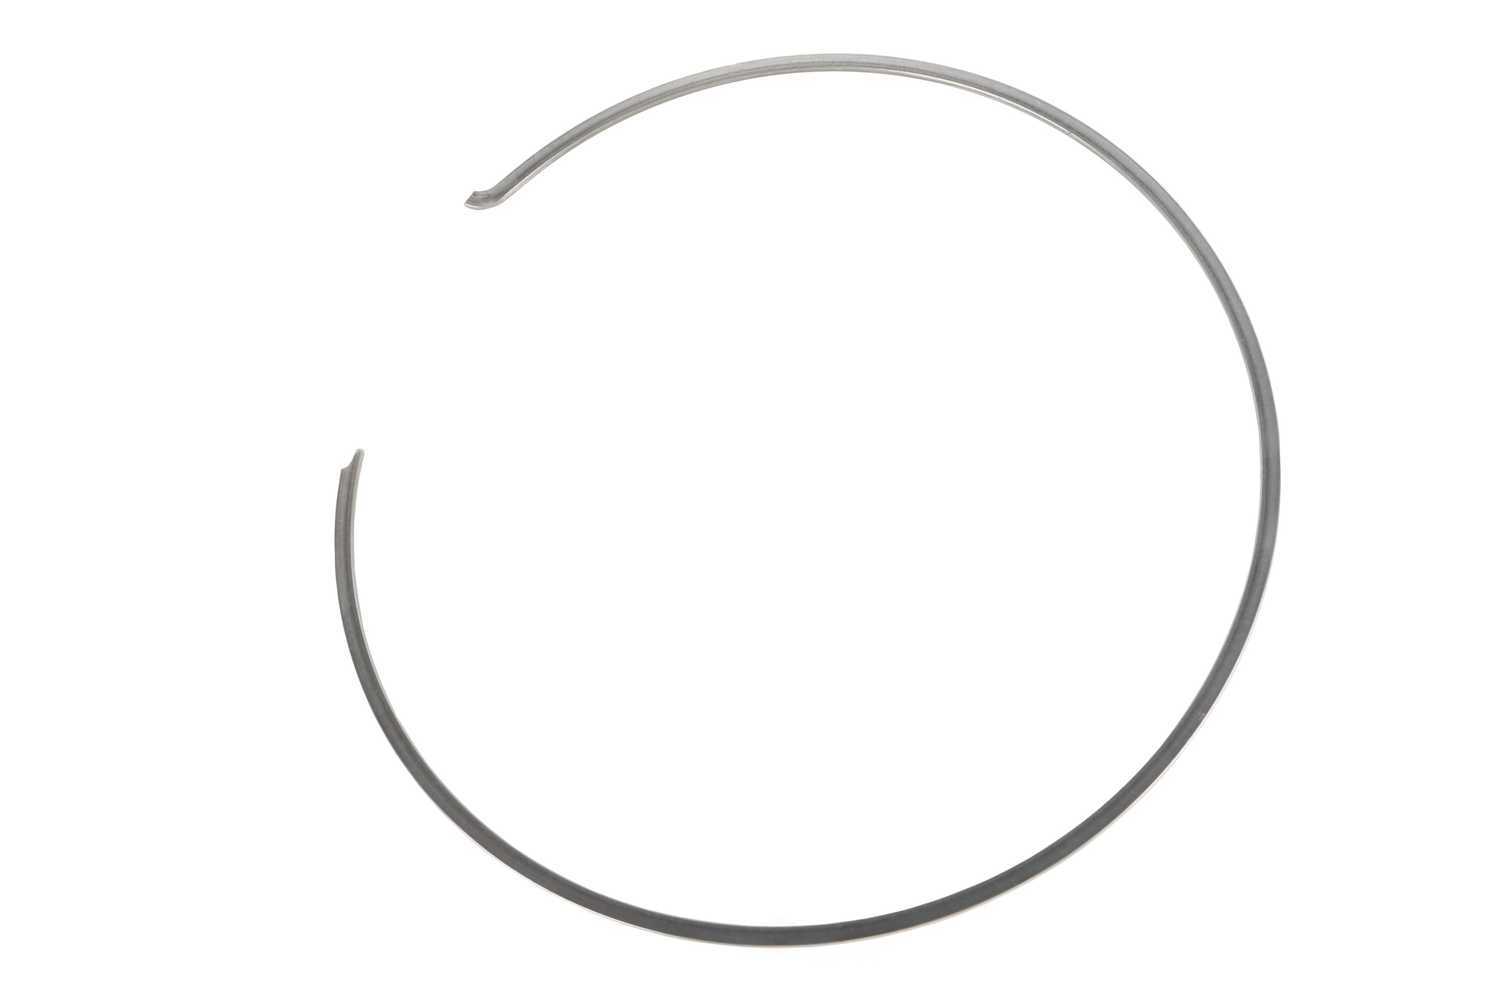 GM GENUINE PARTS - Automatic Transmission Clutch Retaining Ring - GMP 24261606